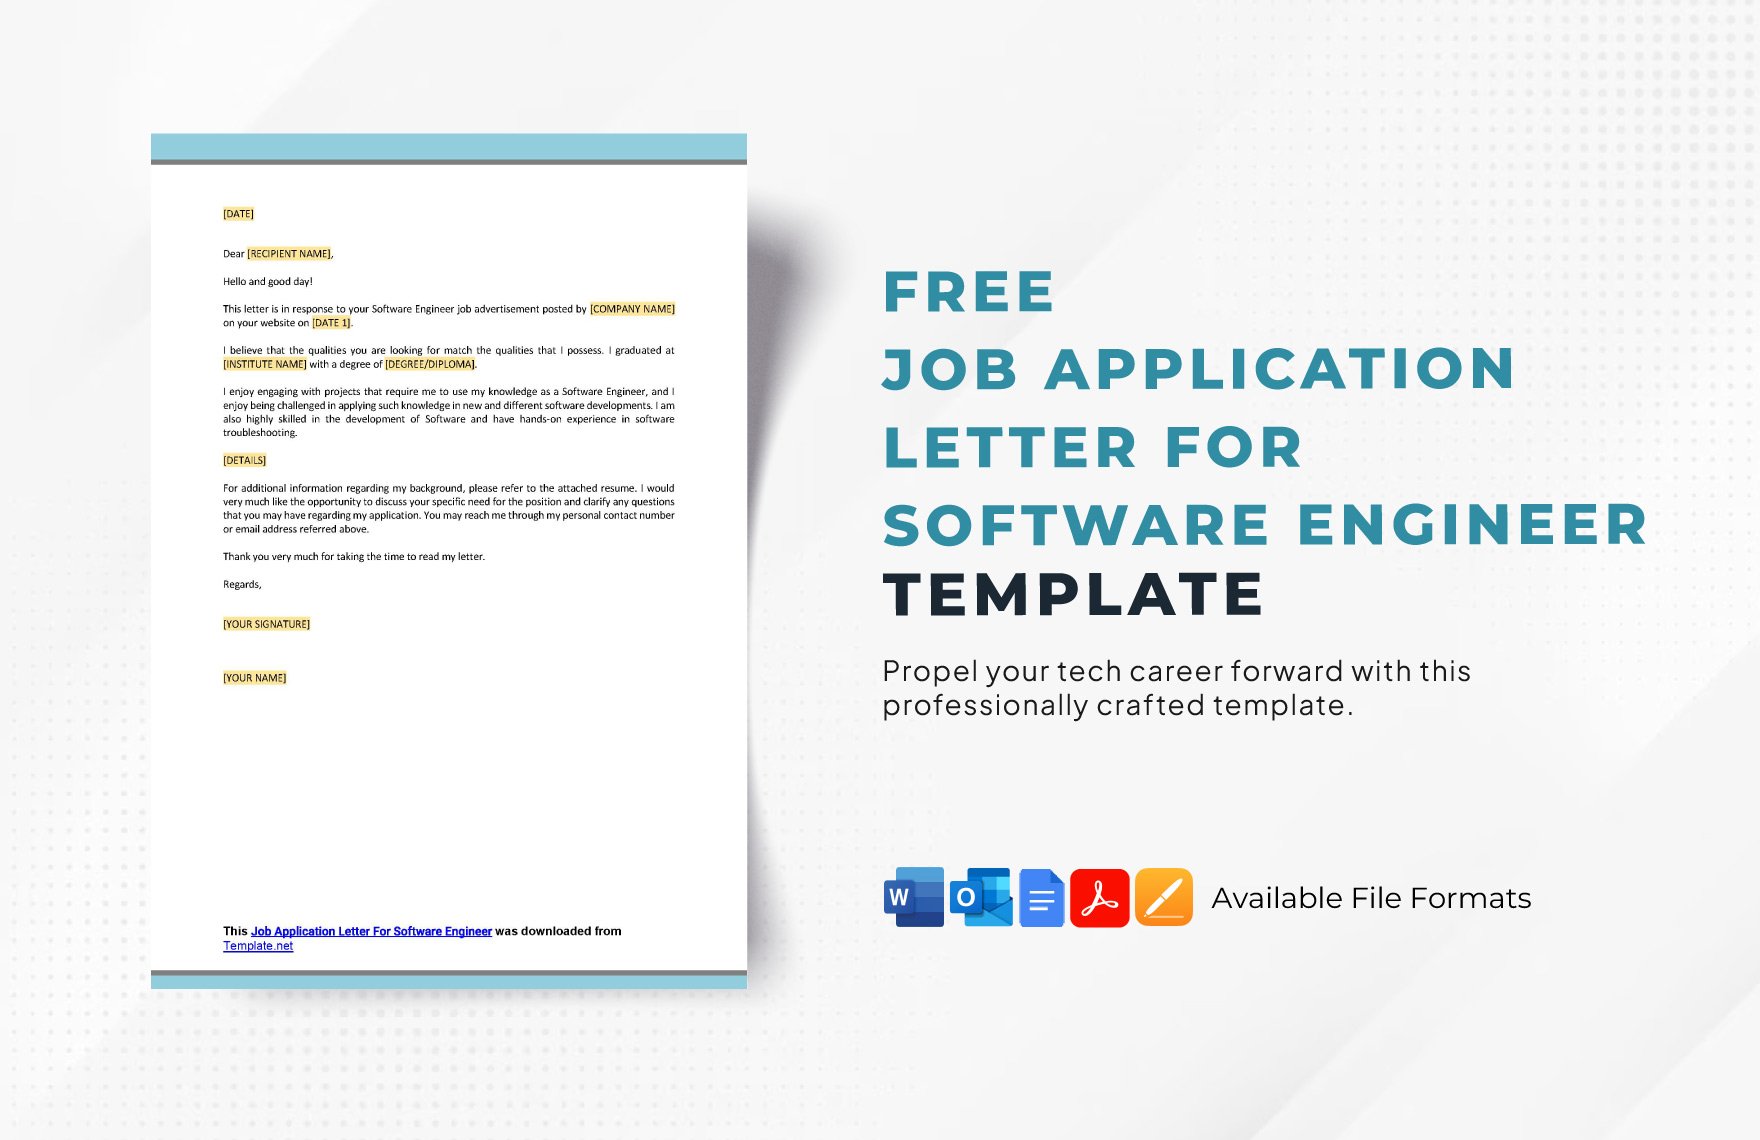 Job Application Letter For Software Engineer in Word, Google Docs, PDF, Apple Pages, Outlook